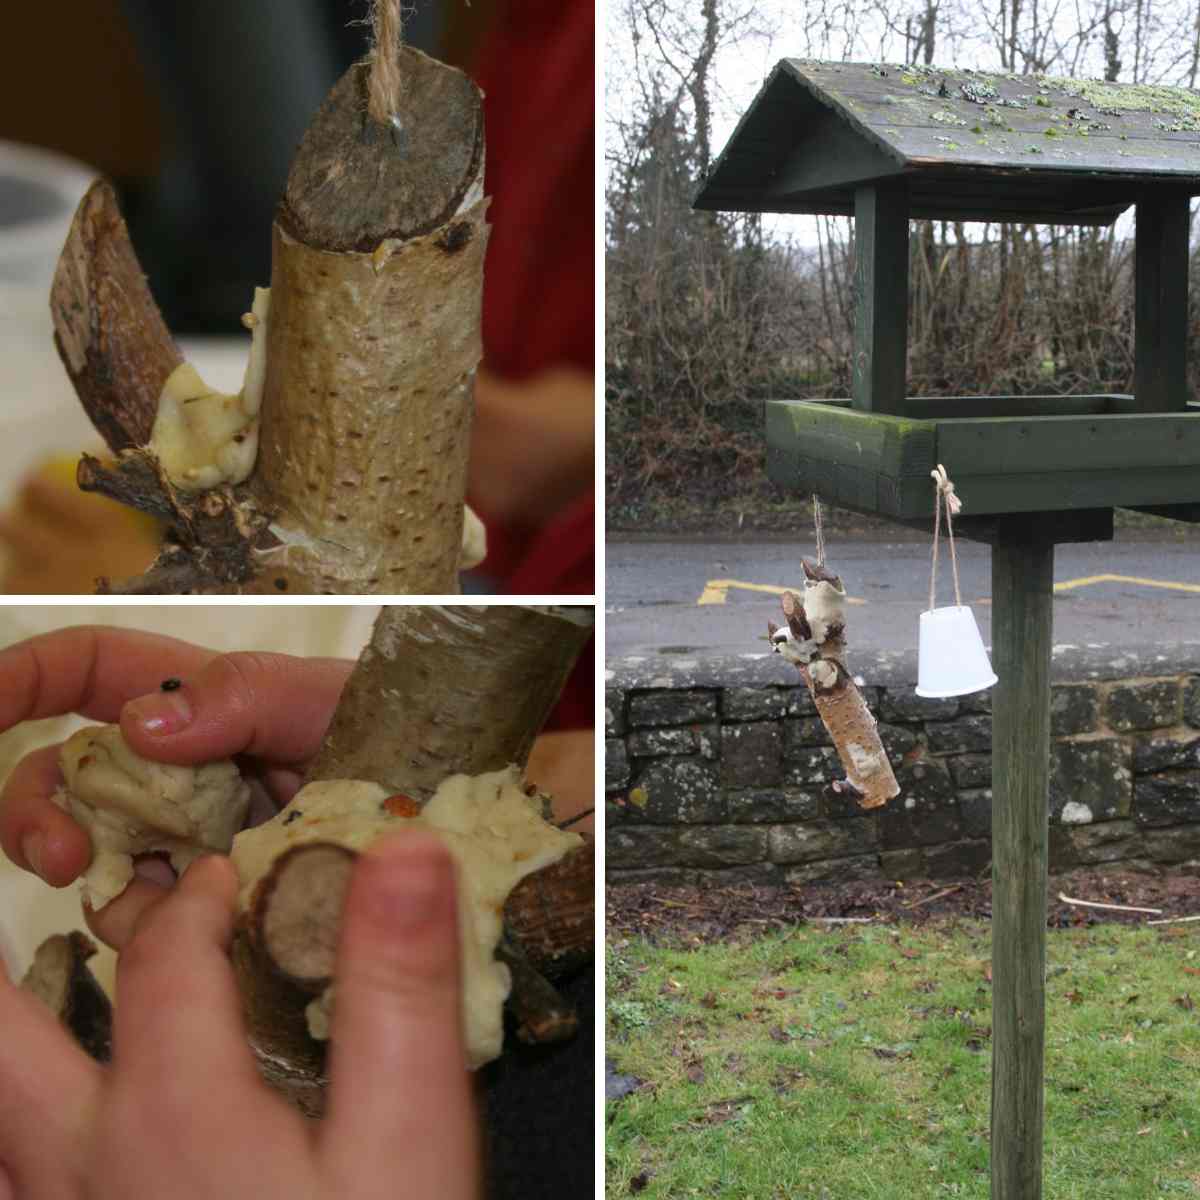 Three images in a grid of dough branch bird feeders, two of them showing fatty dough being pushed into the crevices and holes on a piece of branch, and one showing a feeder hanging off a bird table by string. This is part of a blog about different ways to make bird feeders with kids